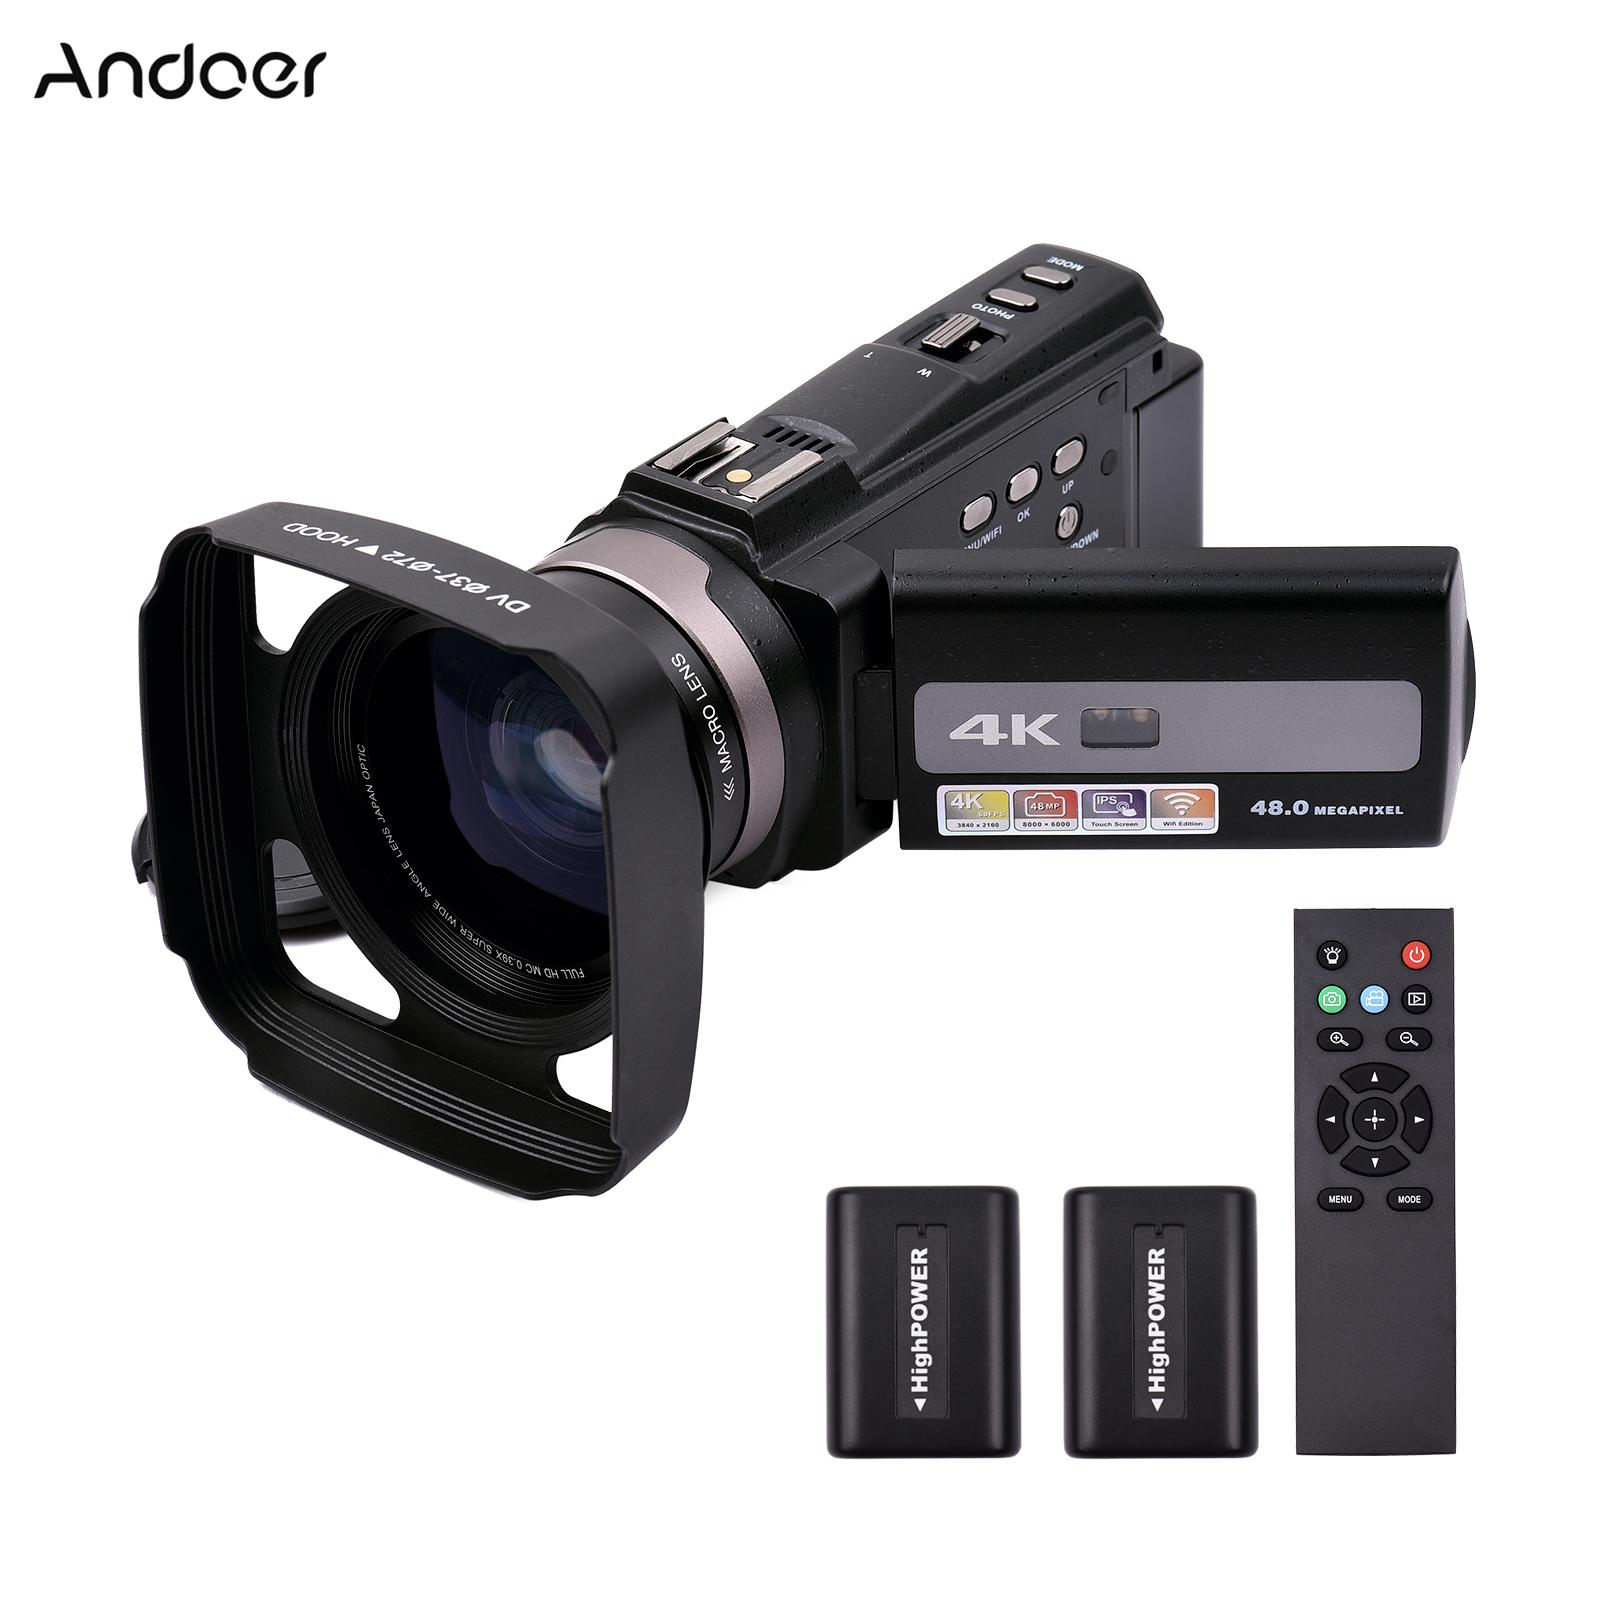 GoolRC Andoer 4K 60FPS Ultra HD Digital Video Camera DV Camcorder 48MP 16X Zoom 3-inch Rotatable LCD Touch